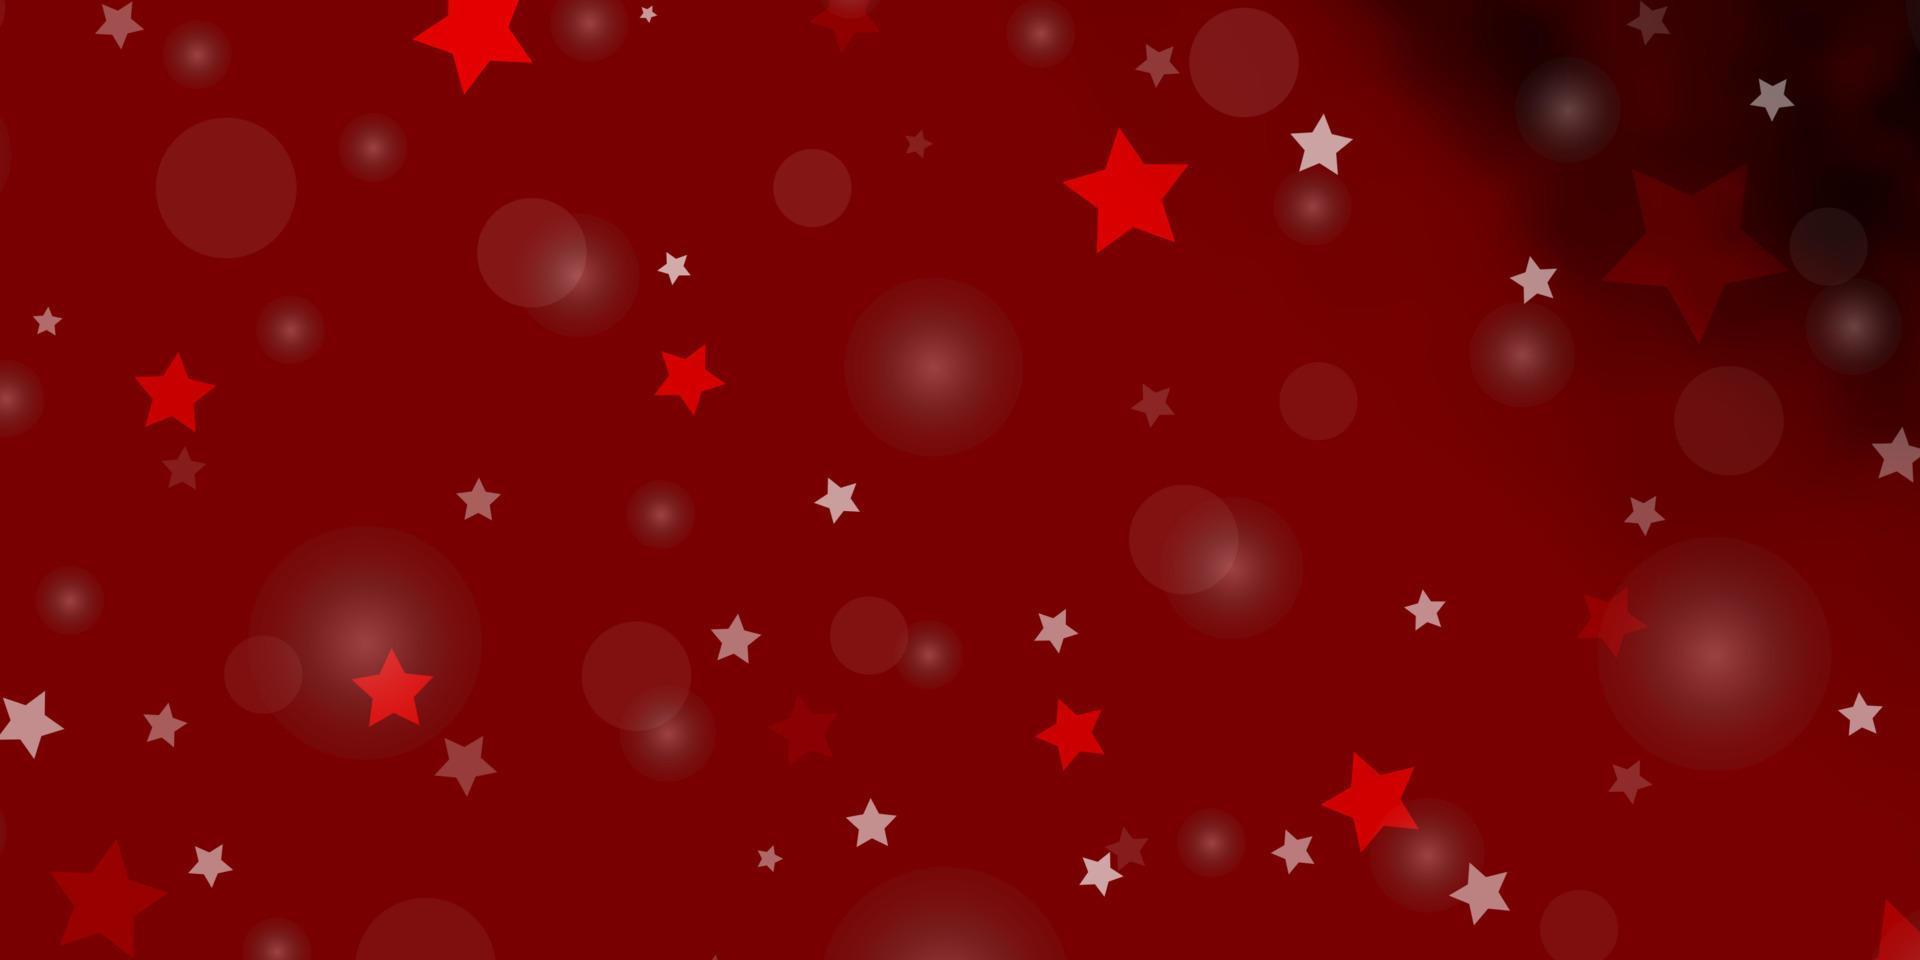 Light Red vector layout with circles, stars.